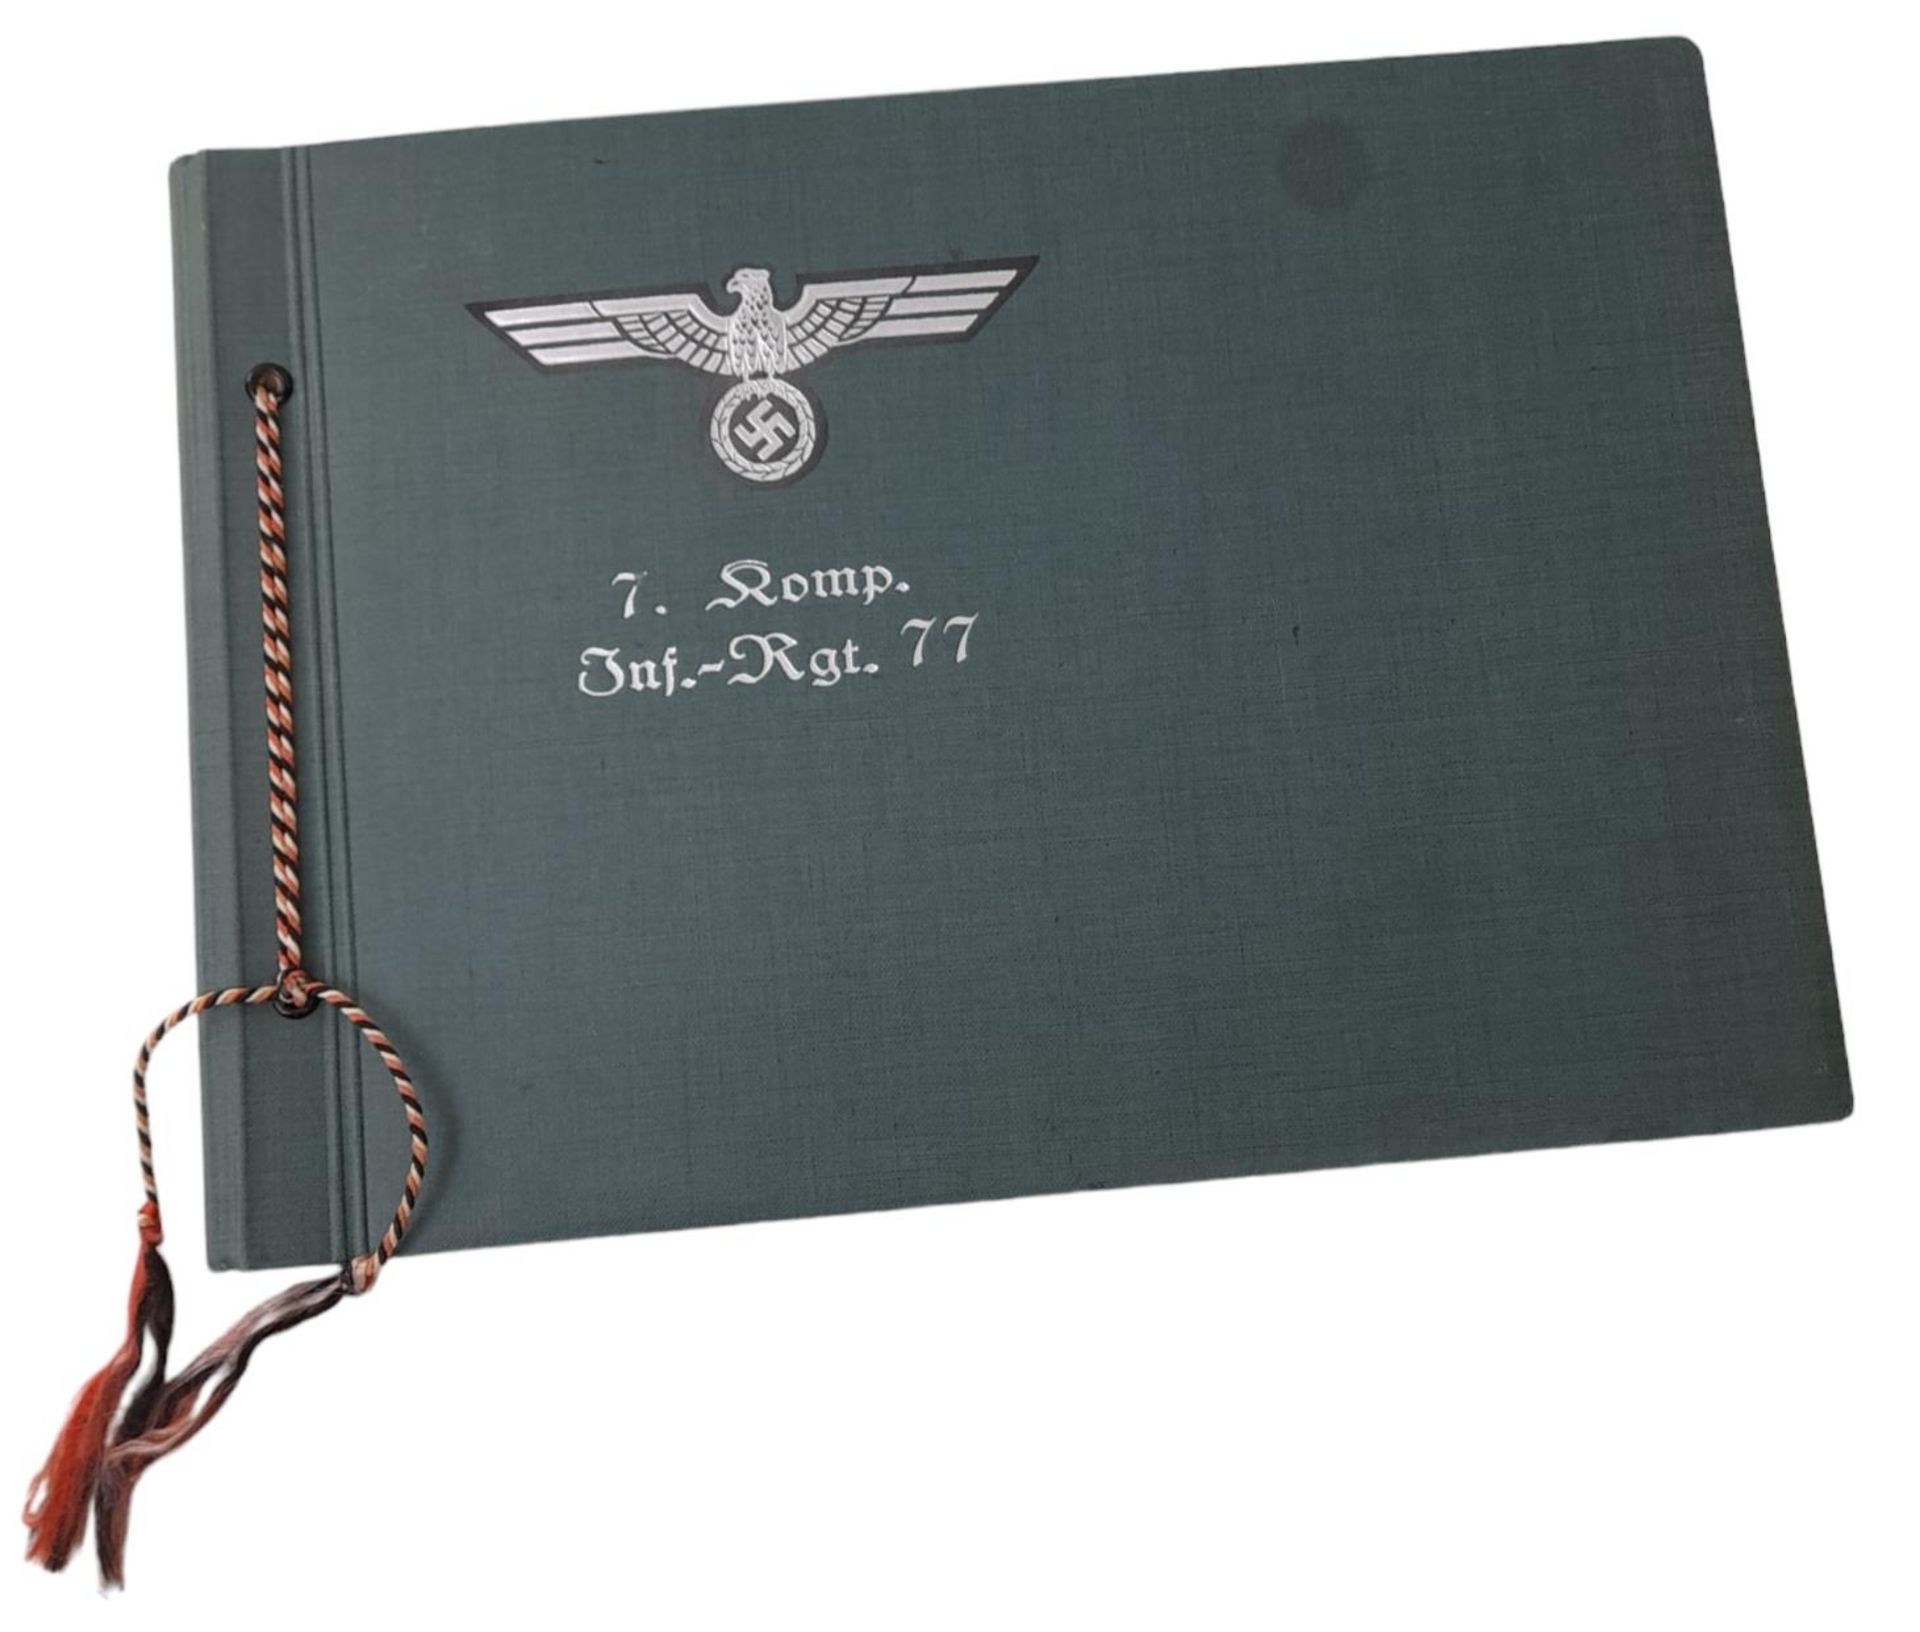 A very interesting Photo Album with no blank pages, depicting a soldiers memento’s serving with 7